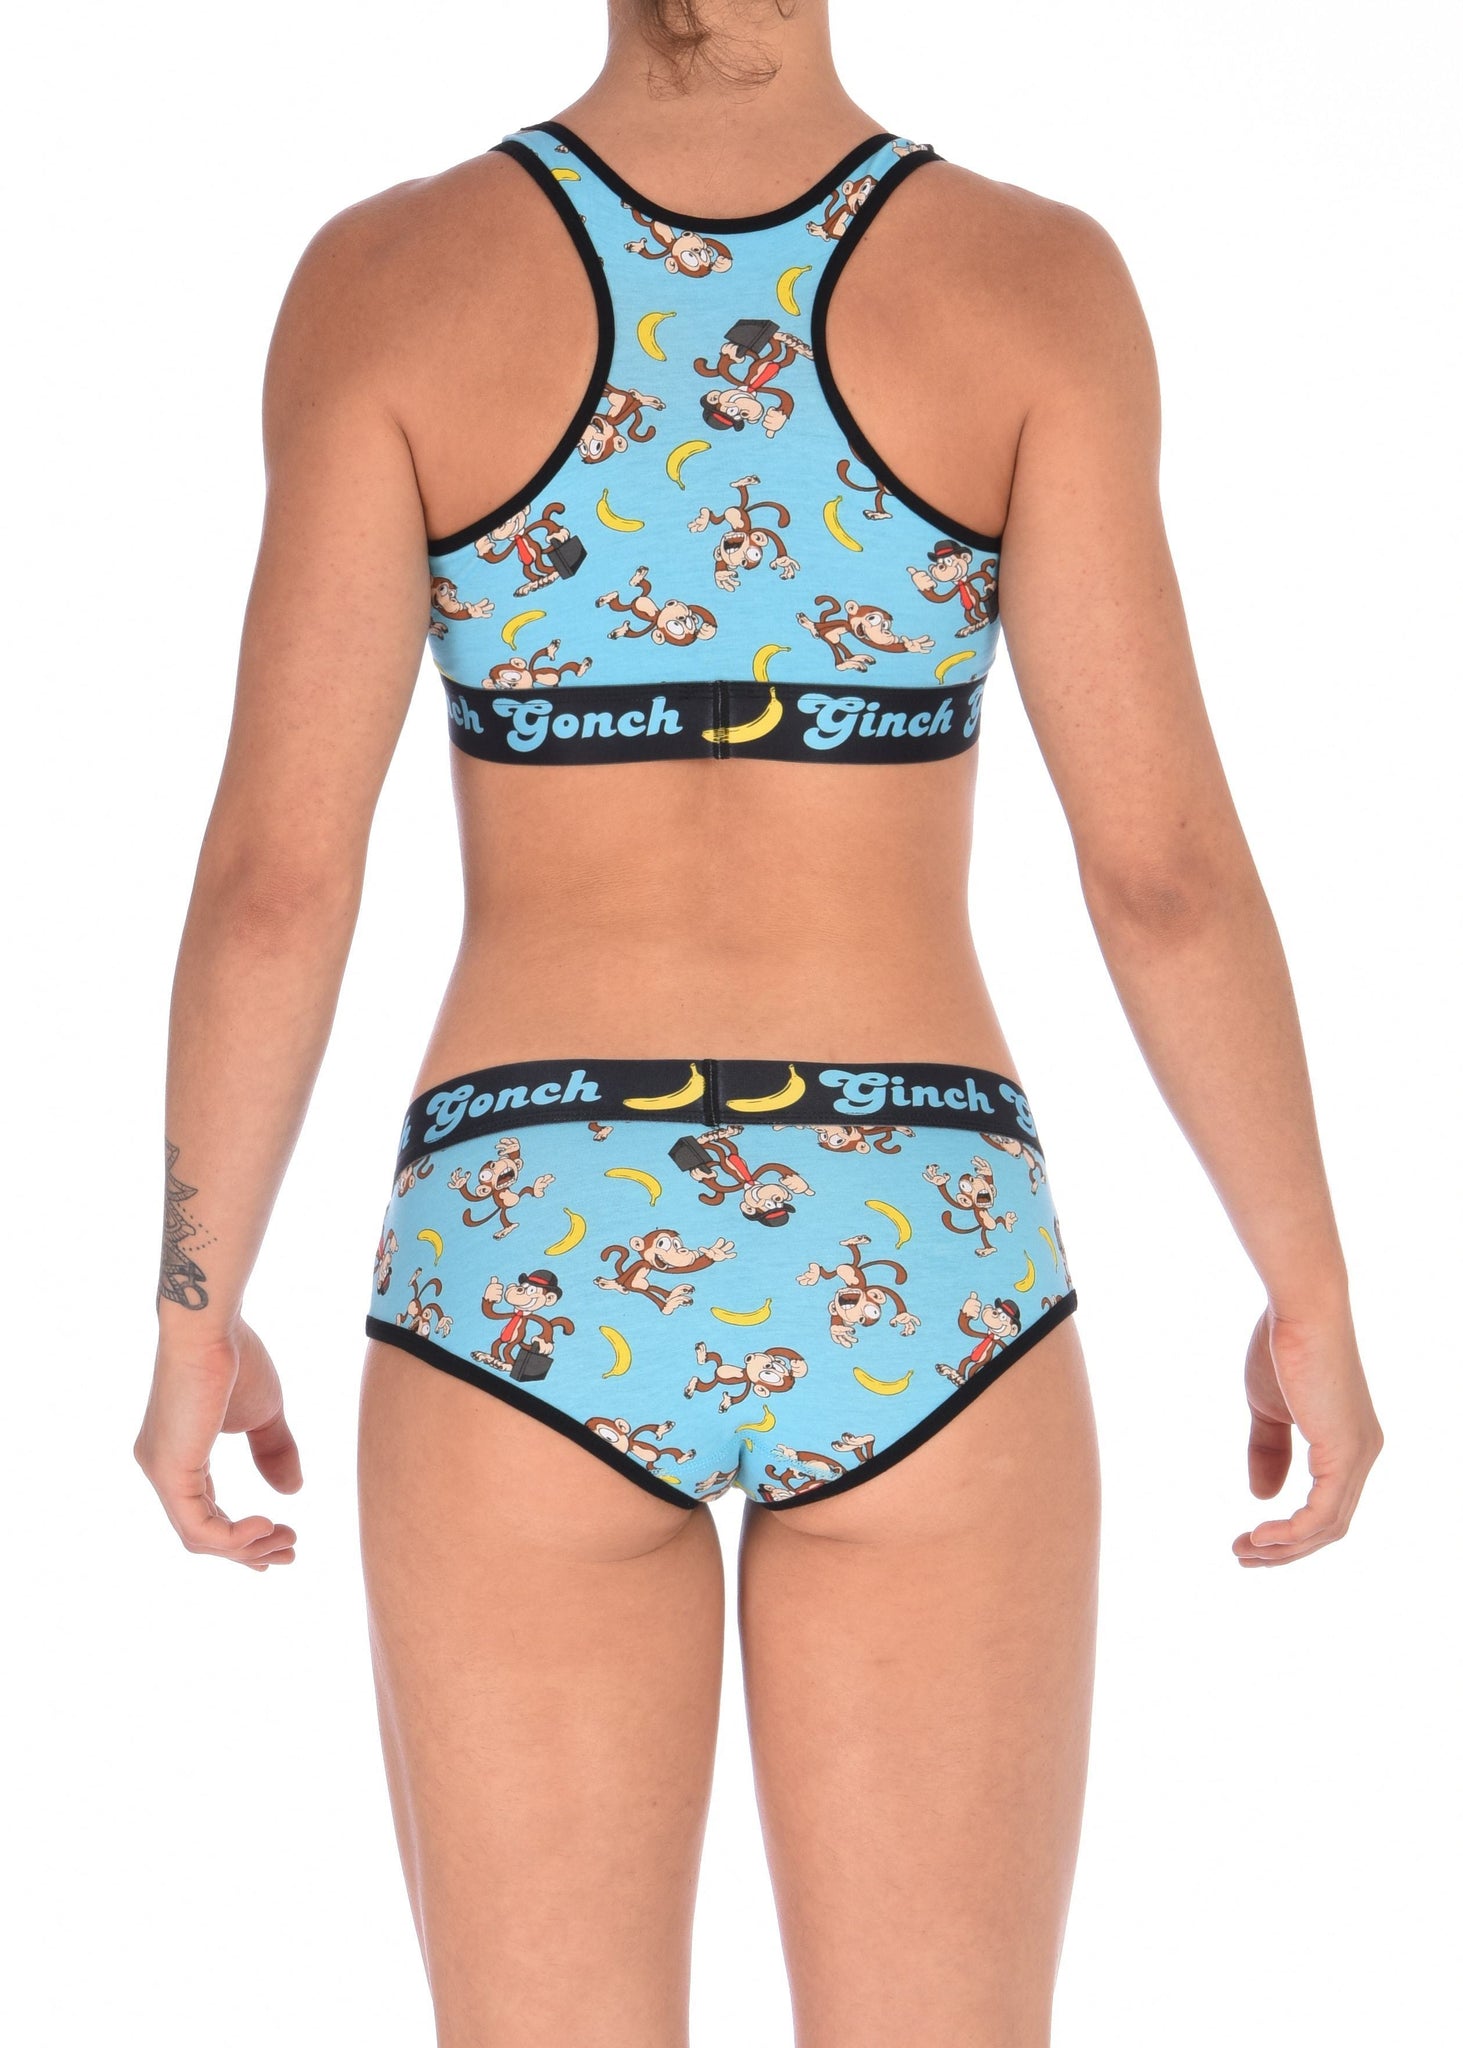 Ginch Gonch Monkey Business Women's Underwear boy cut brief with y front, with blue background, monkeys, and bananas. Black trim and printed waistband with Ginch Gonch and bananas. Back. Matching Sports Bra.